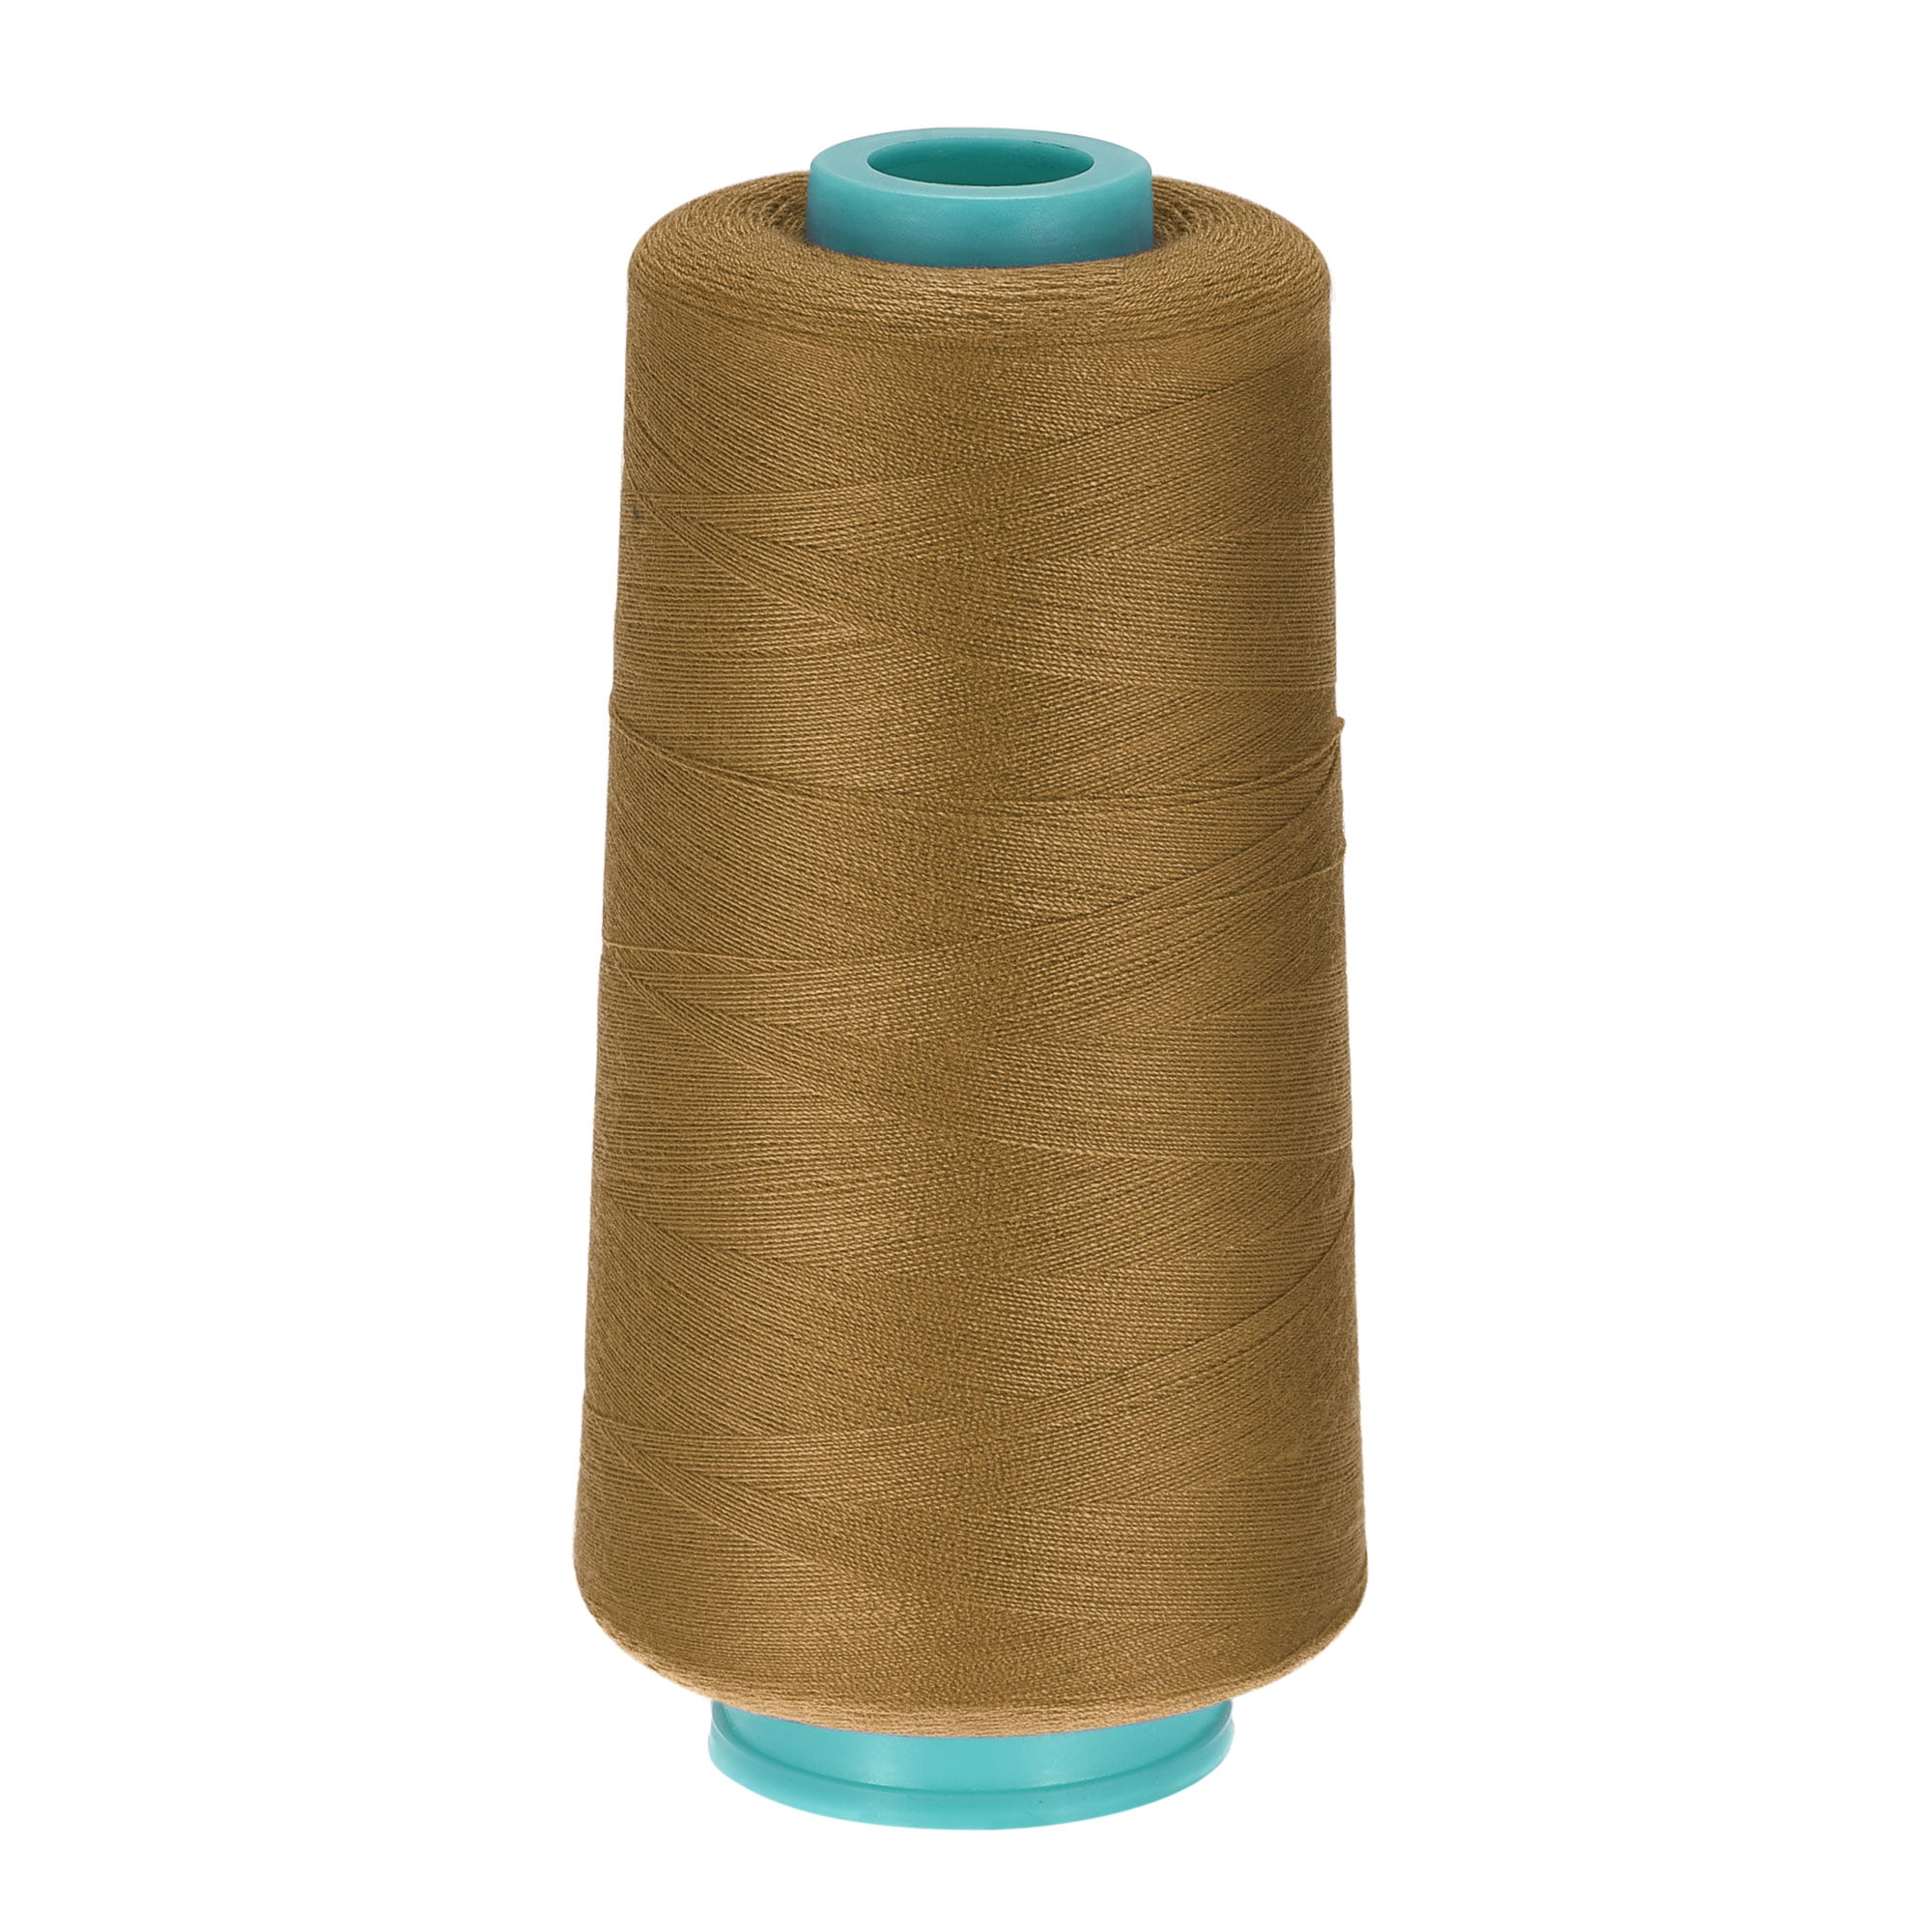 Simthread All Purpose Sewing Thread, 10 Spool 1000 Yards Polyester Thread  for Sewing, Handy Polyester Sewing Threads for Sewing Machine - (Brown